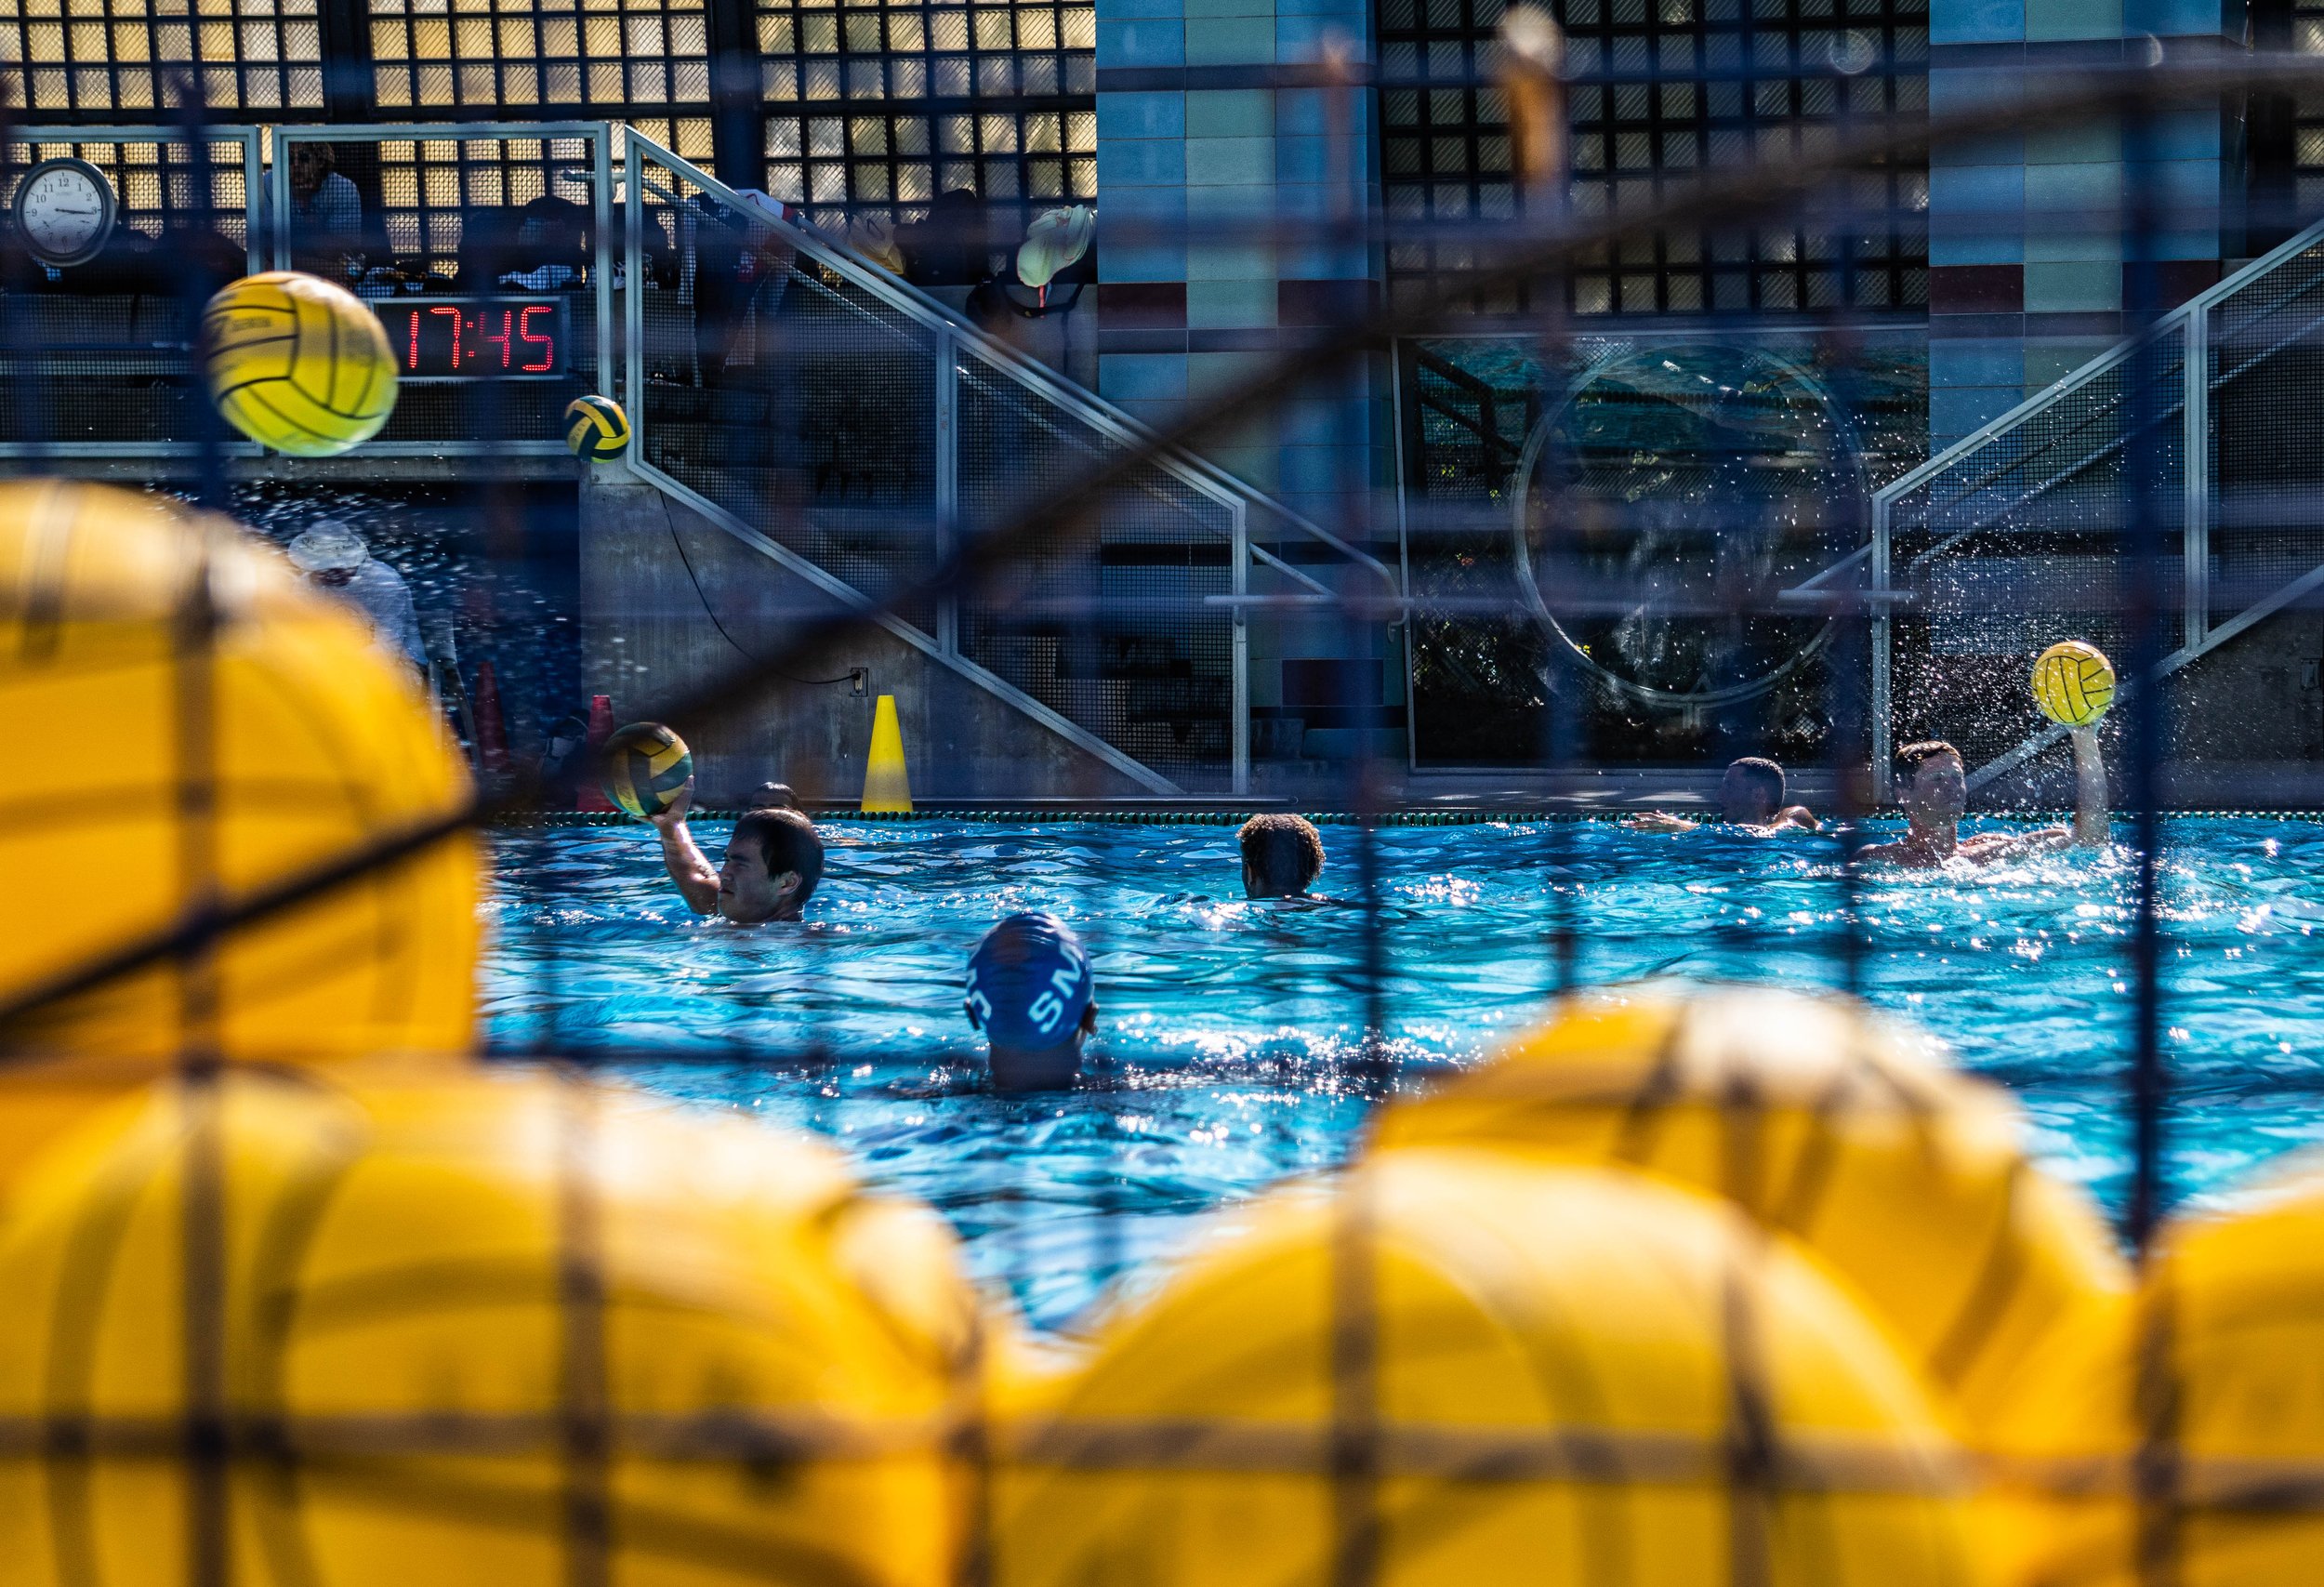  The Santa Monica College Corsairs Men's Water Polo team warm uo before their match with The LA Valley Monarchs at the SMC Swim Center on Sept. 28, 2022. The Corsairs lose to the Monarchs 23-4. Santa Monica, Calif. (Ee Lin Tsen | The Corsair) 